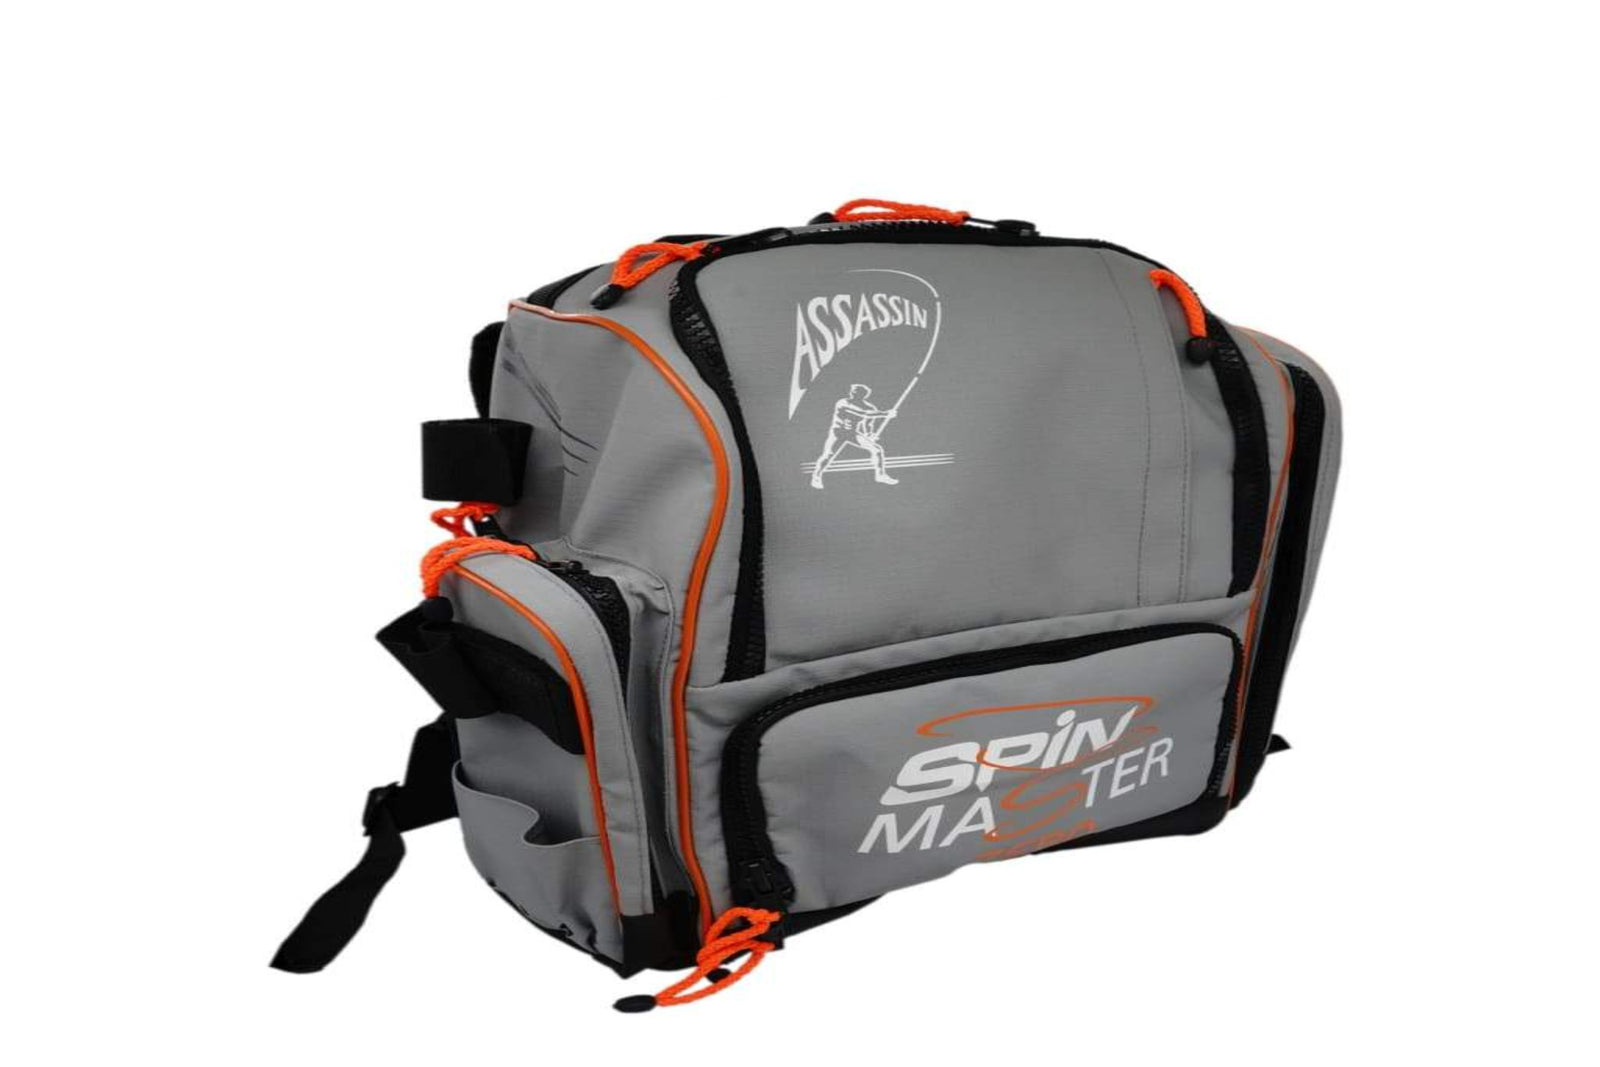 https://fishingstore.co.za/cdn/shop/products/assassin-spin-master-zero-backpack-accessories-allaccessories-bags-boxes-freshwater-saltwater-big-catch-fishing-tackle-bag-orange-luggage-486_1600x.jpg?v=1629268428